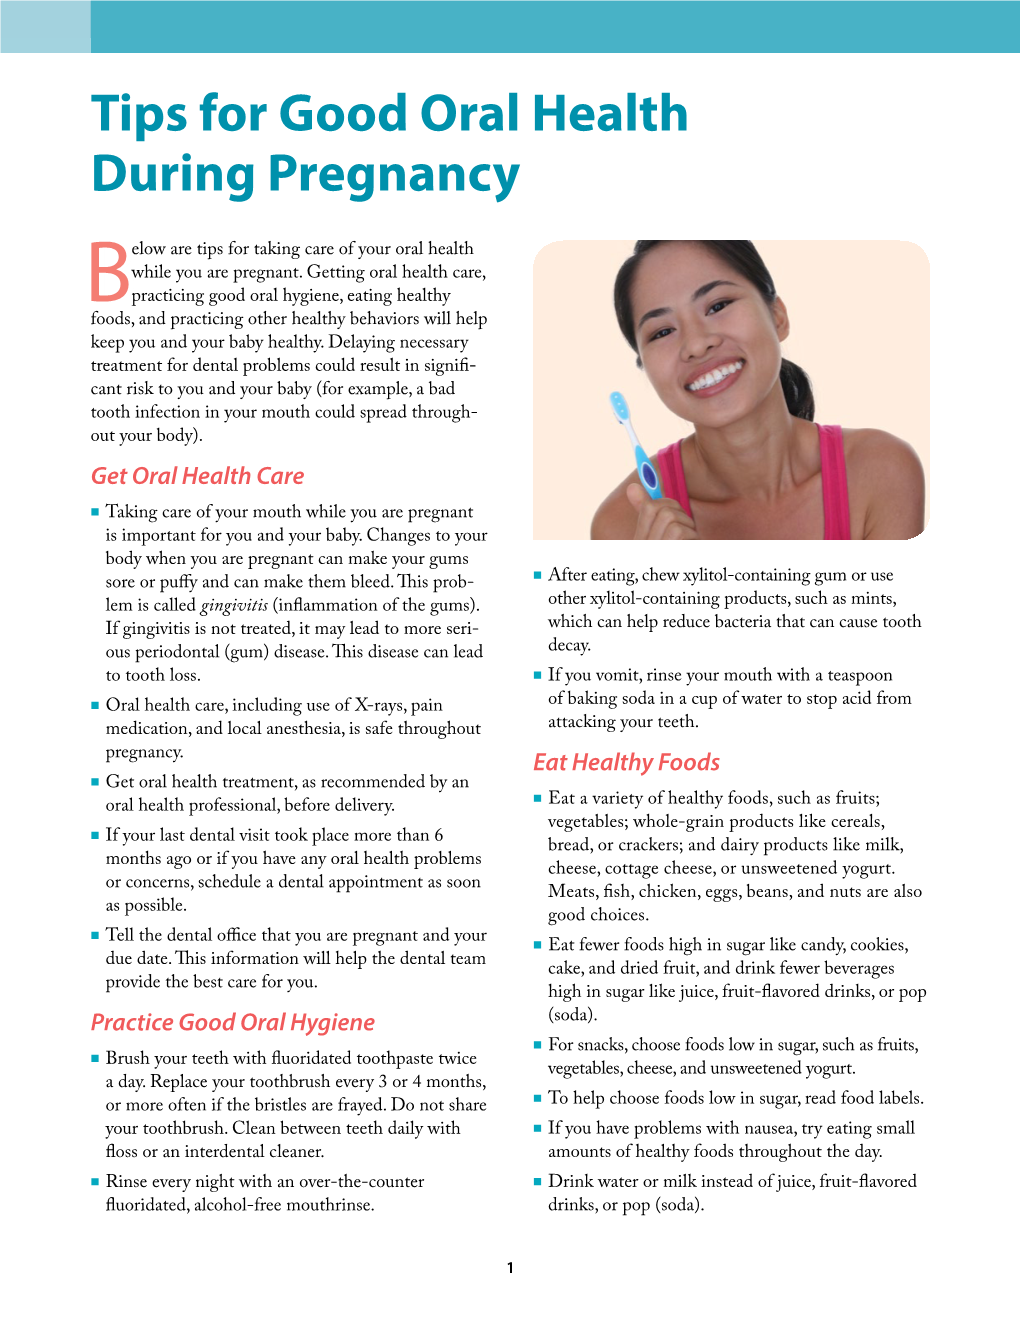 Tips for Good Oral Health During Pregnancy